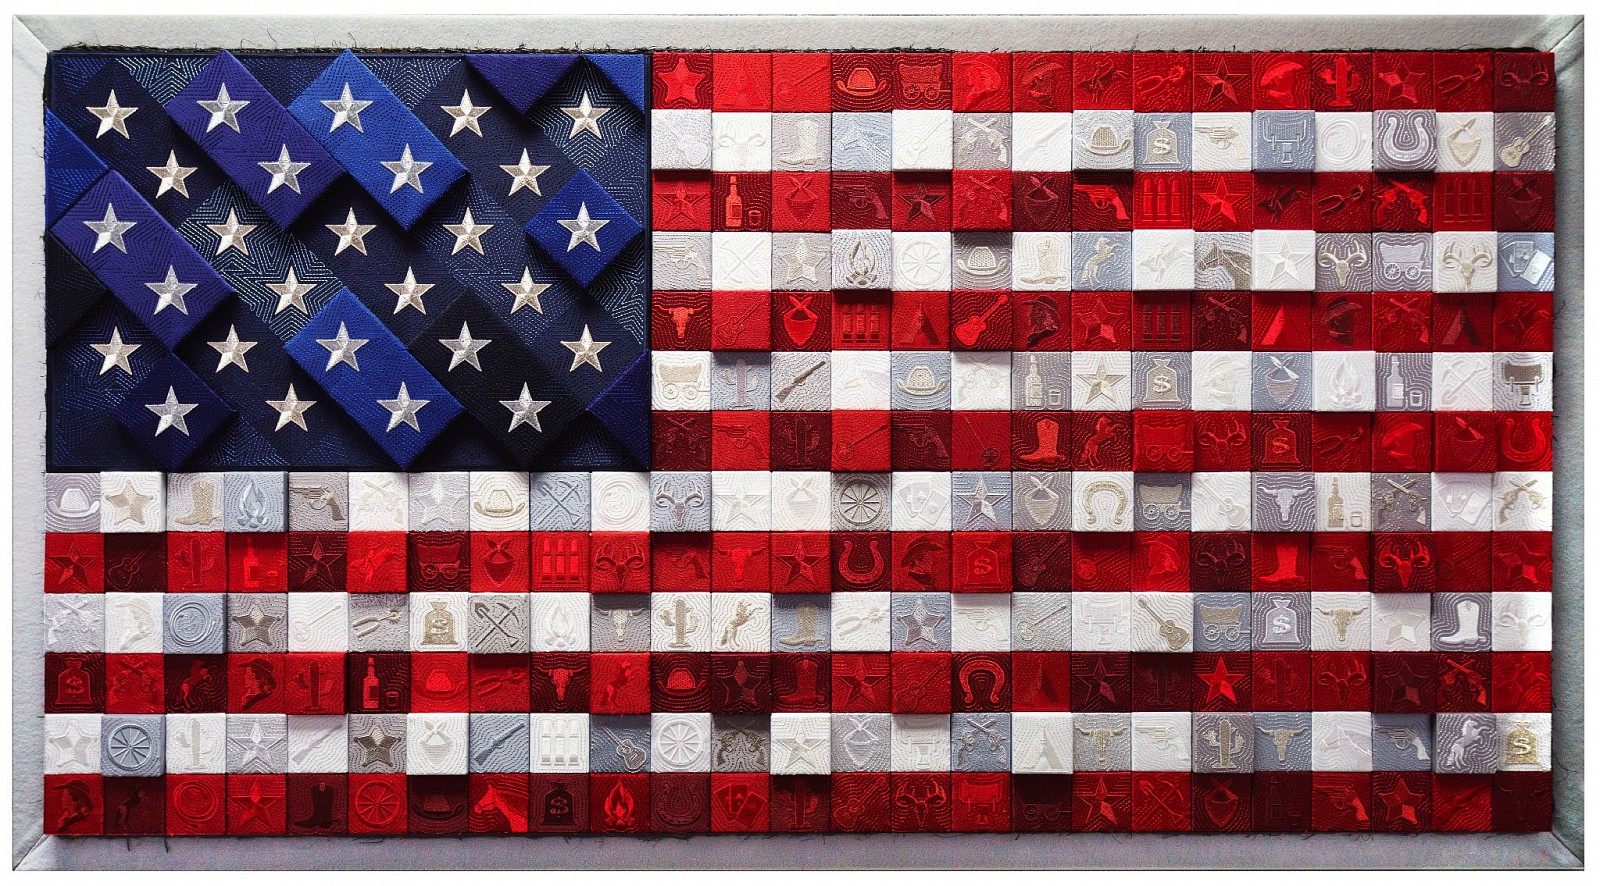 Stephen Wilson, Old Glory, Revisited
2017, Mixed Media